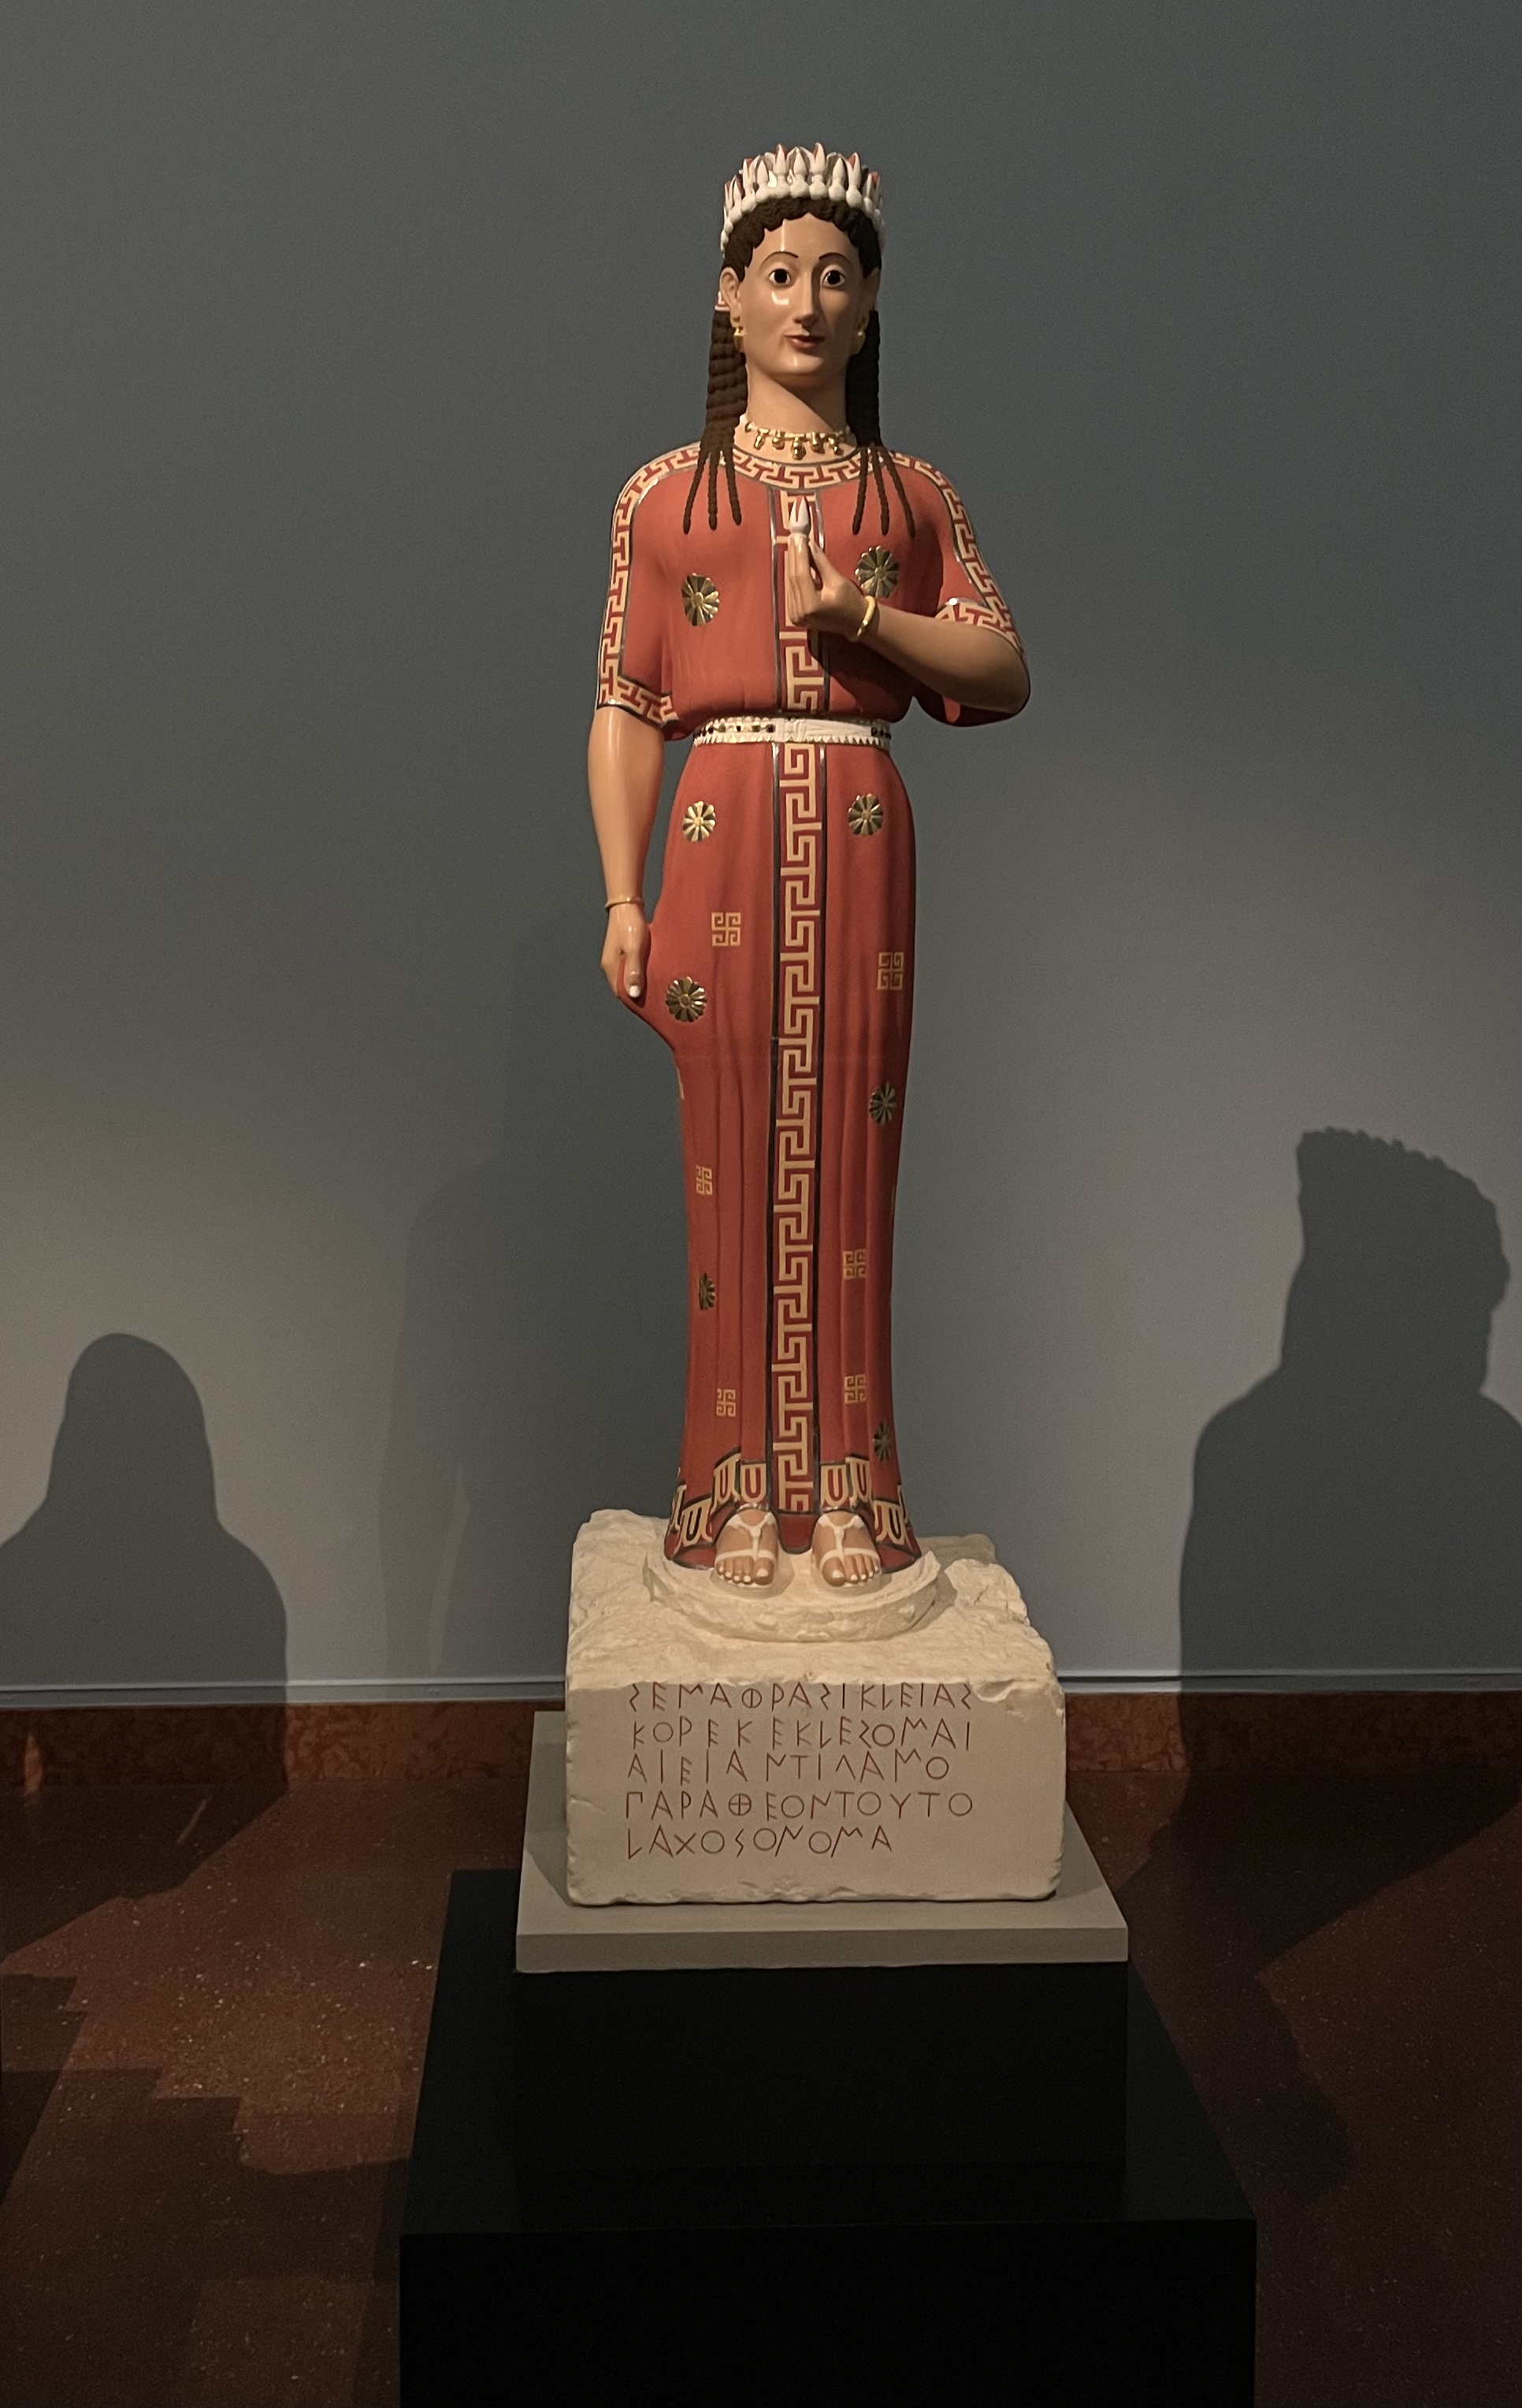 A Greek statue of a woman is on display in a museum.